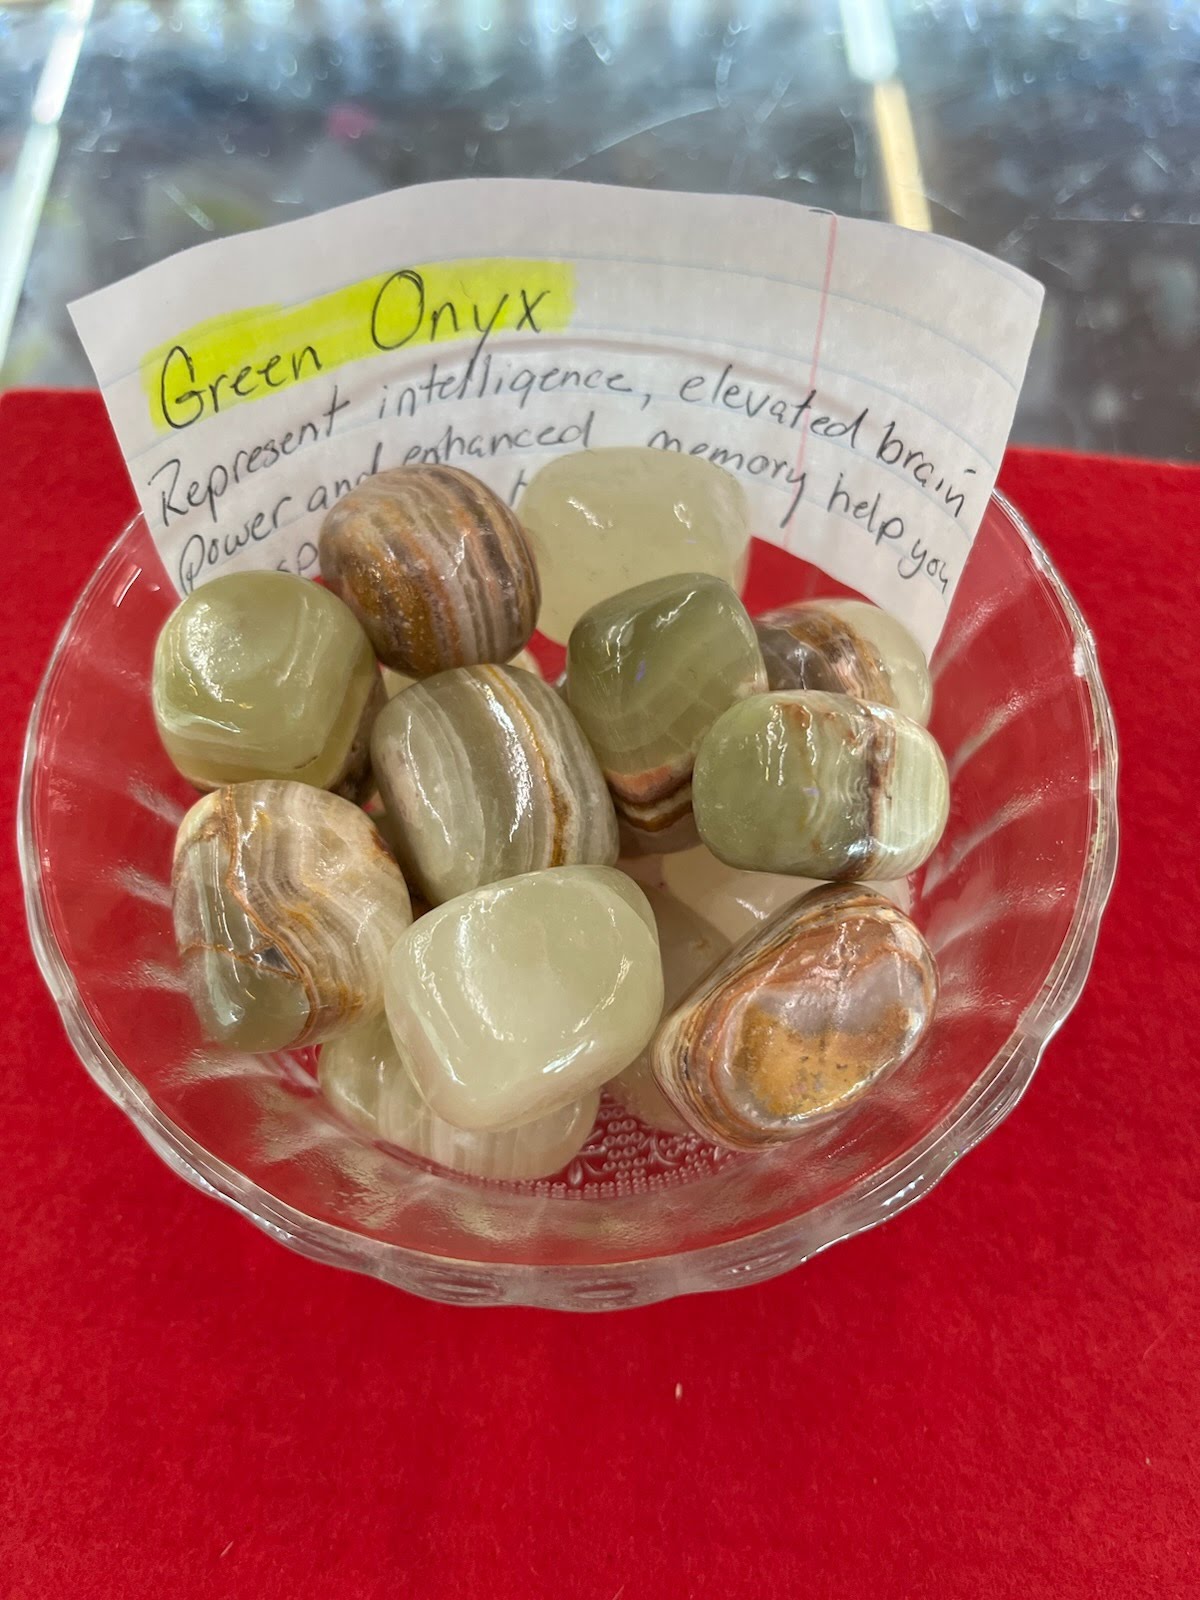 A bowl of green onyx with a note on it.